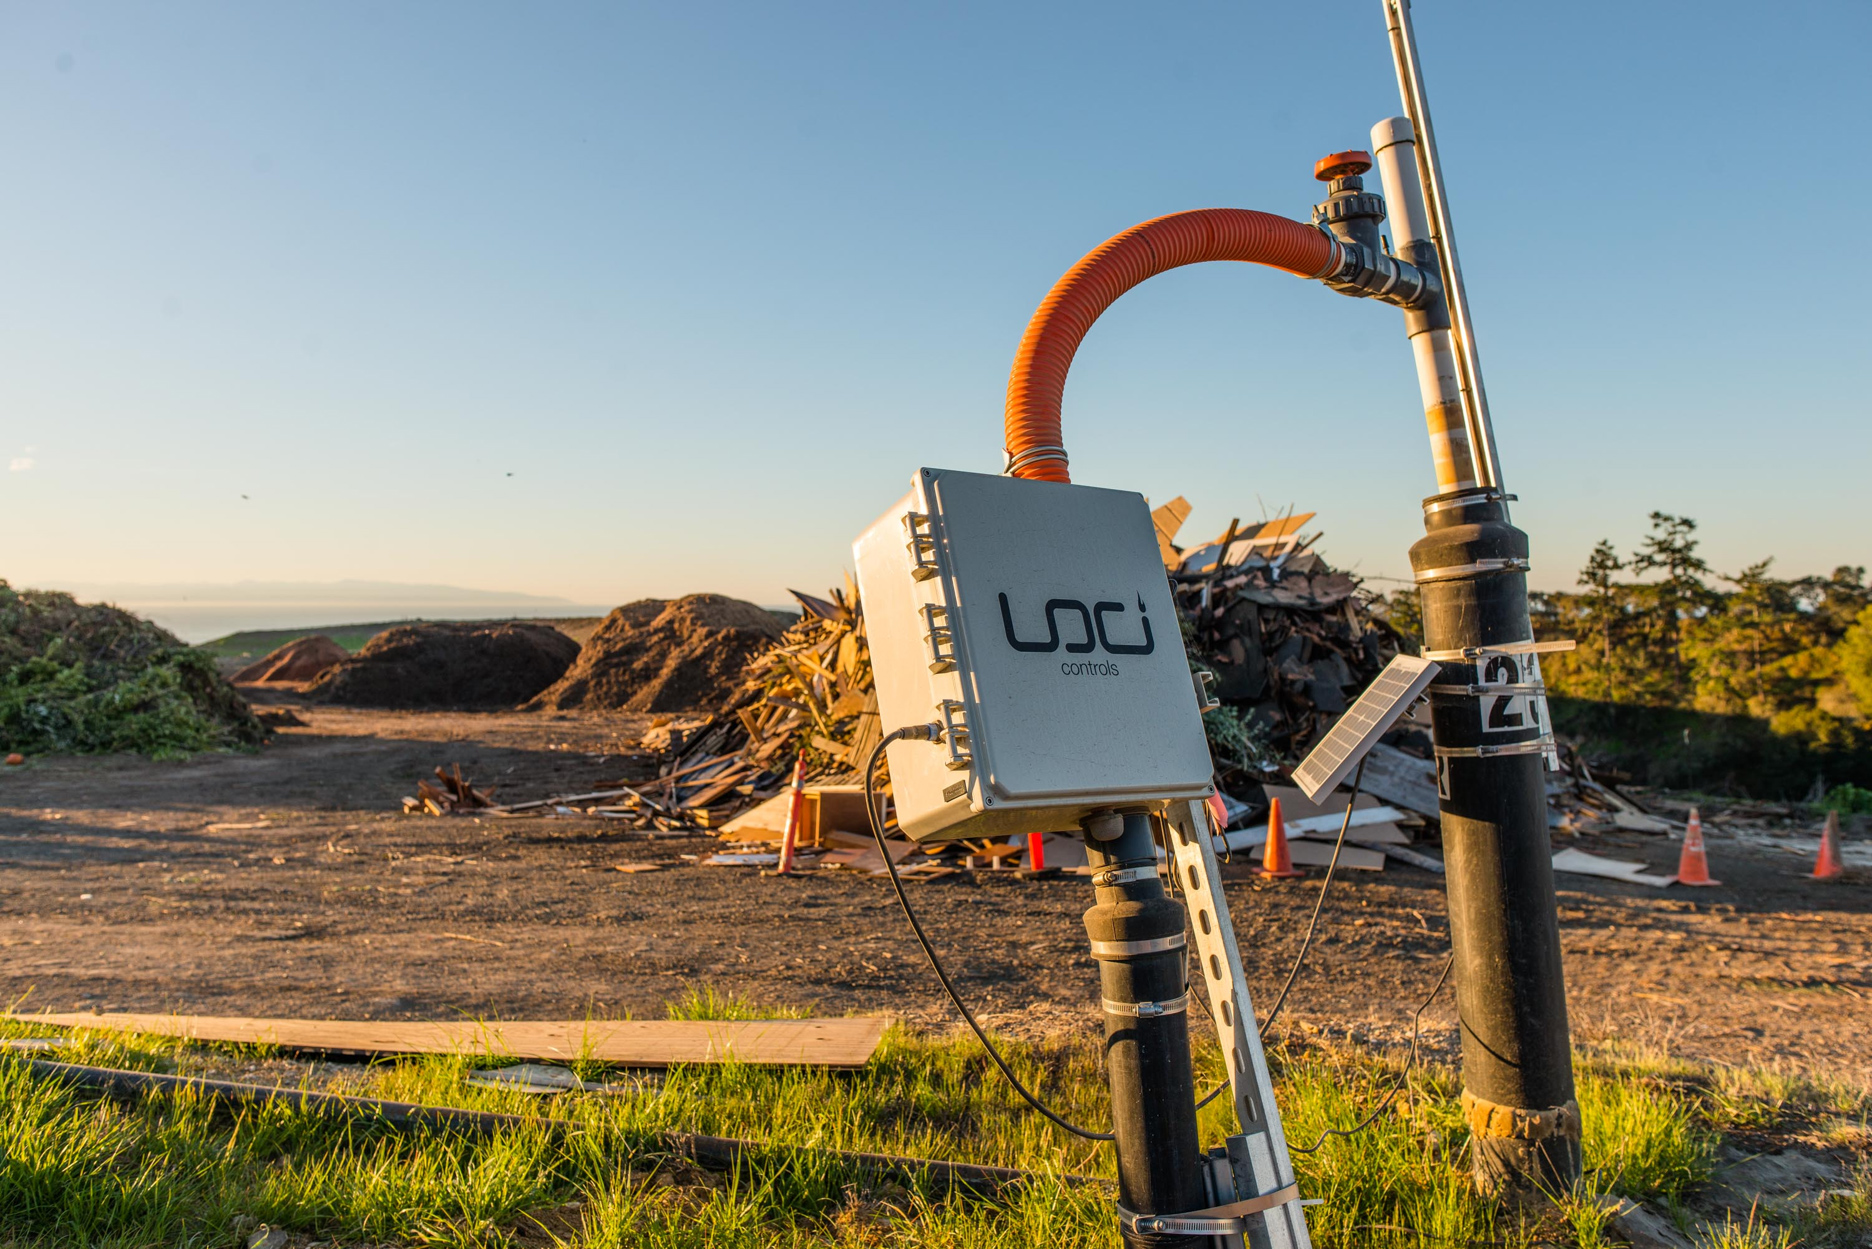 Reducing Methane Emissions with Landfill Gas-to-Energy Projects